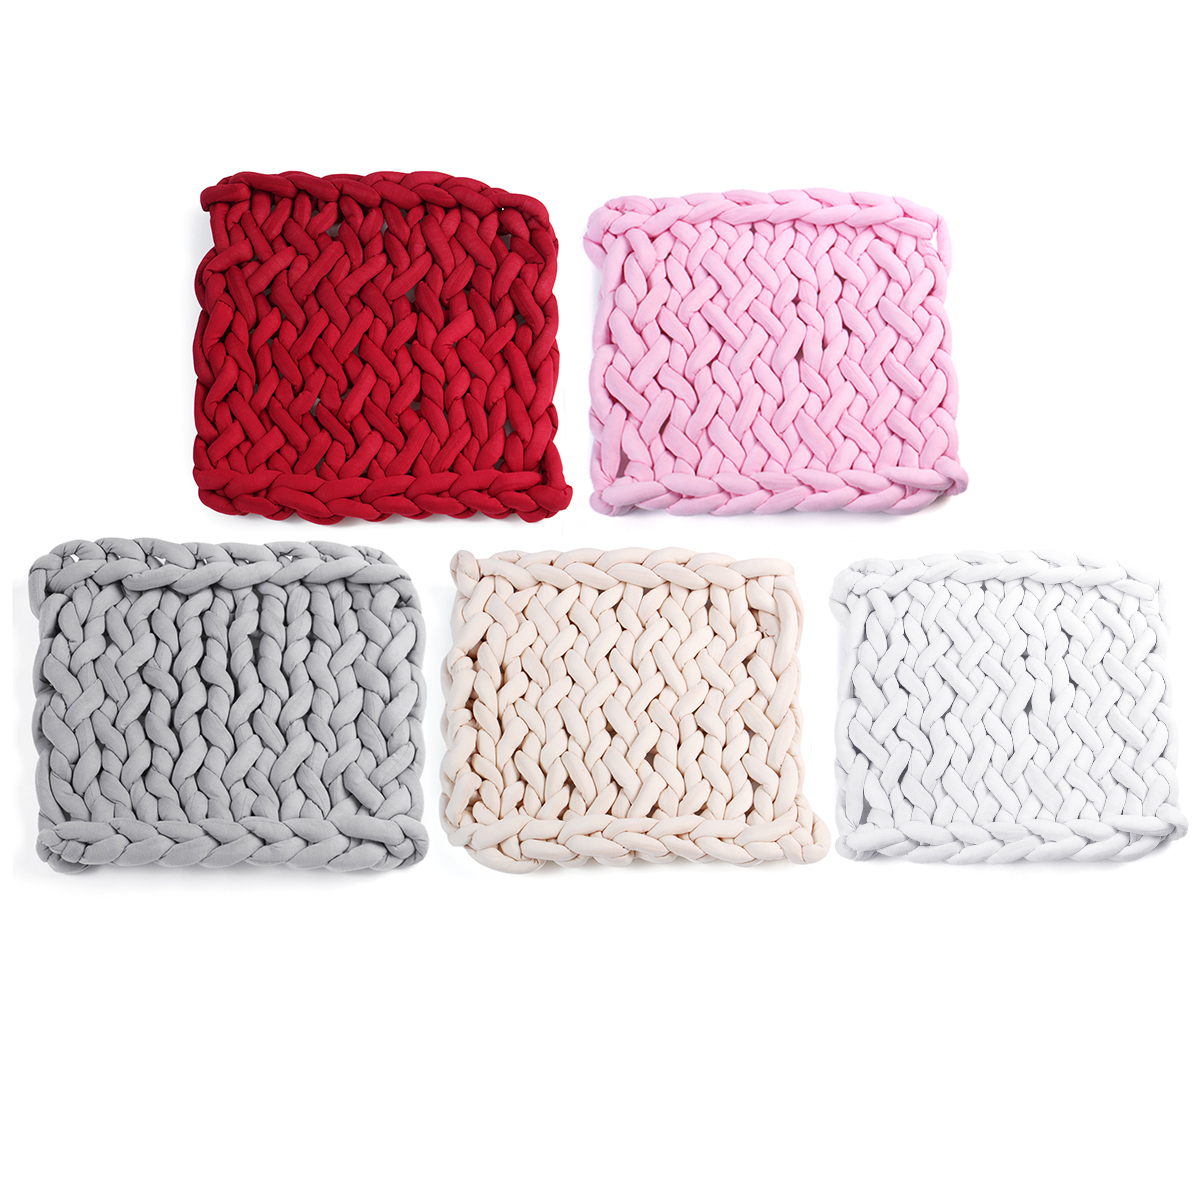 50-x-50cm-Handmade-Knitted-Blanket-Cotton-Soft-Washable-Lint-free-Throw-Multicolored-Thick-Thread-Bl-1637005-4